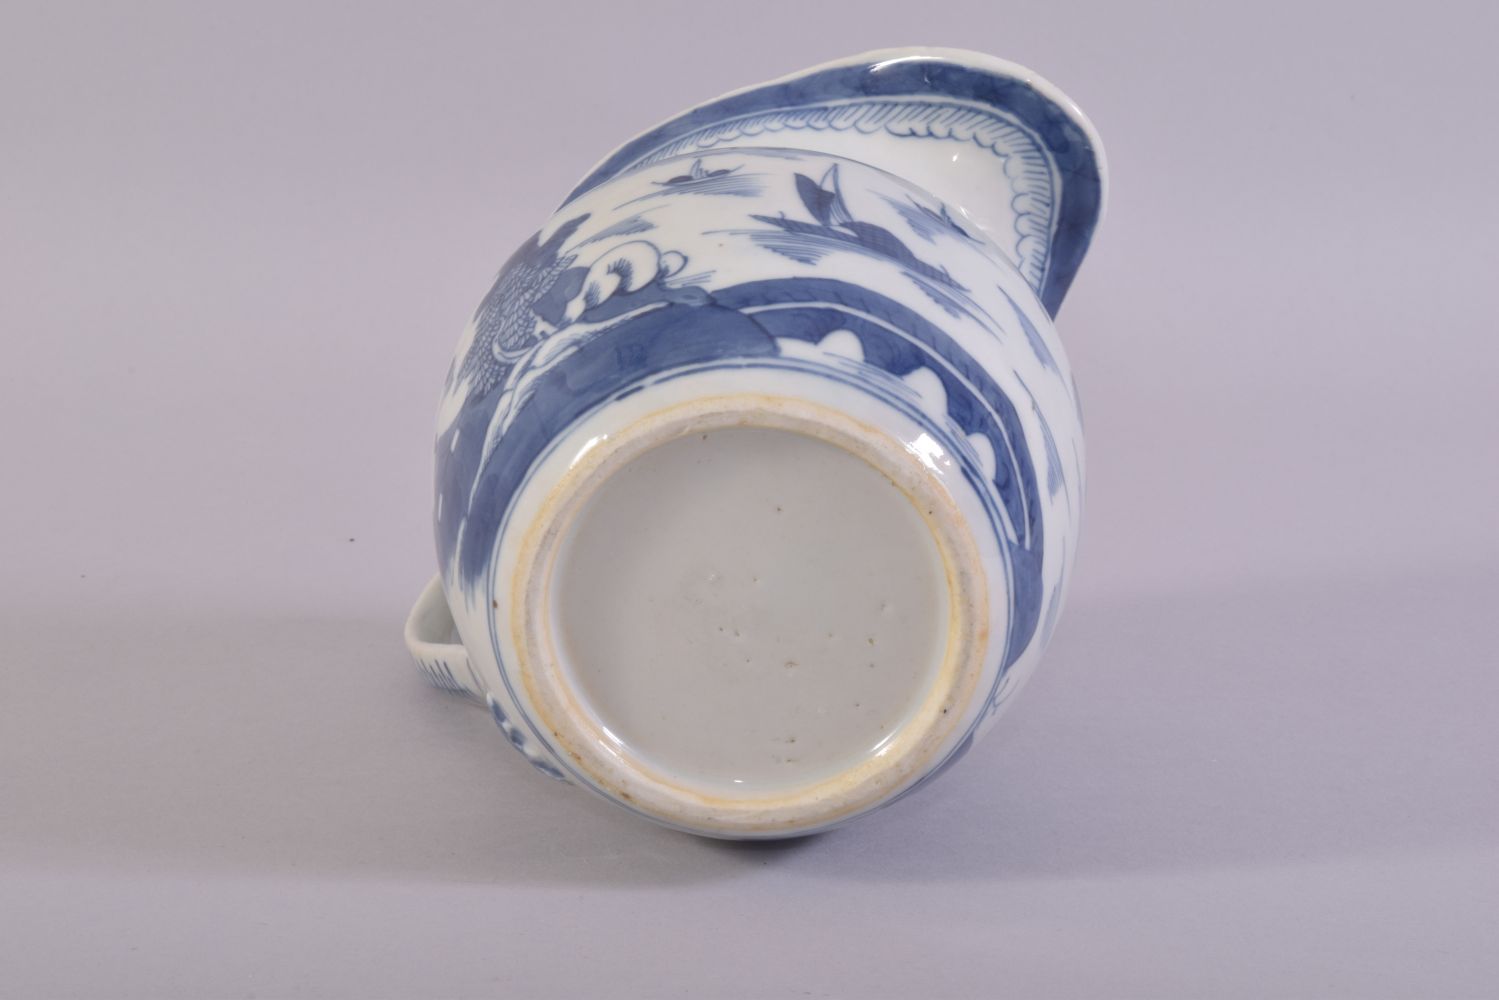 A CHINESE BLUE AND WHITE PORCELAIN JUG, decorated with a landscape scene depicting buildings, - Image 6 of 6